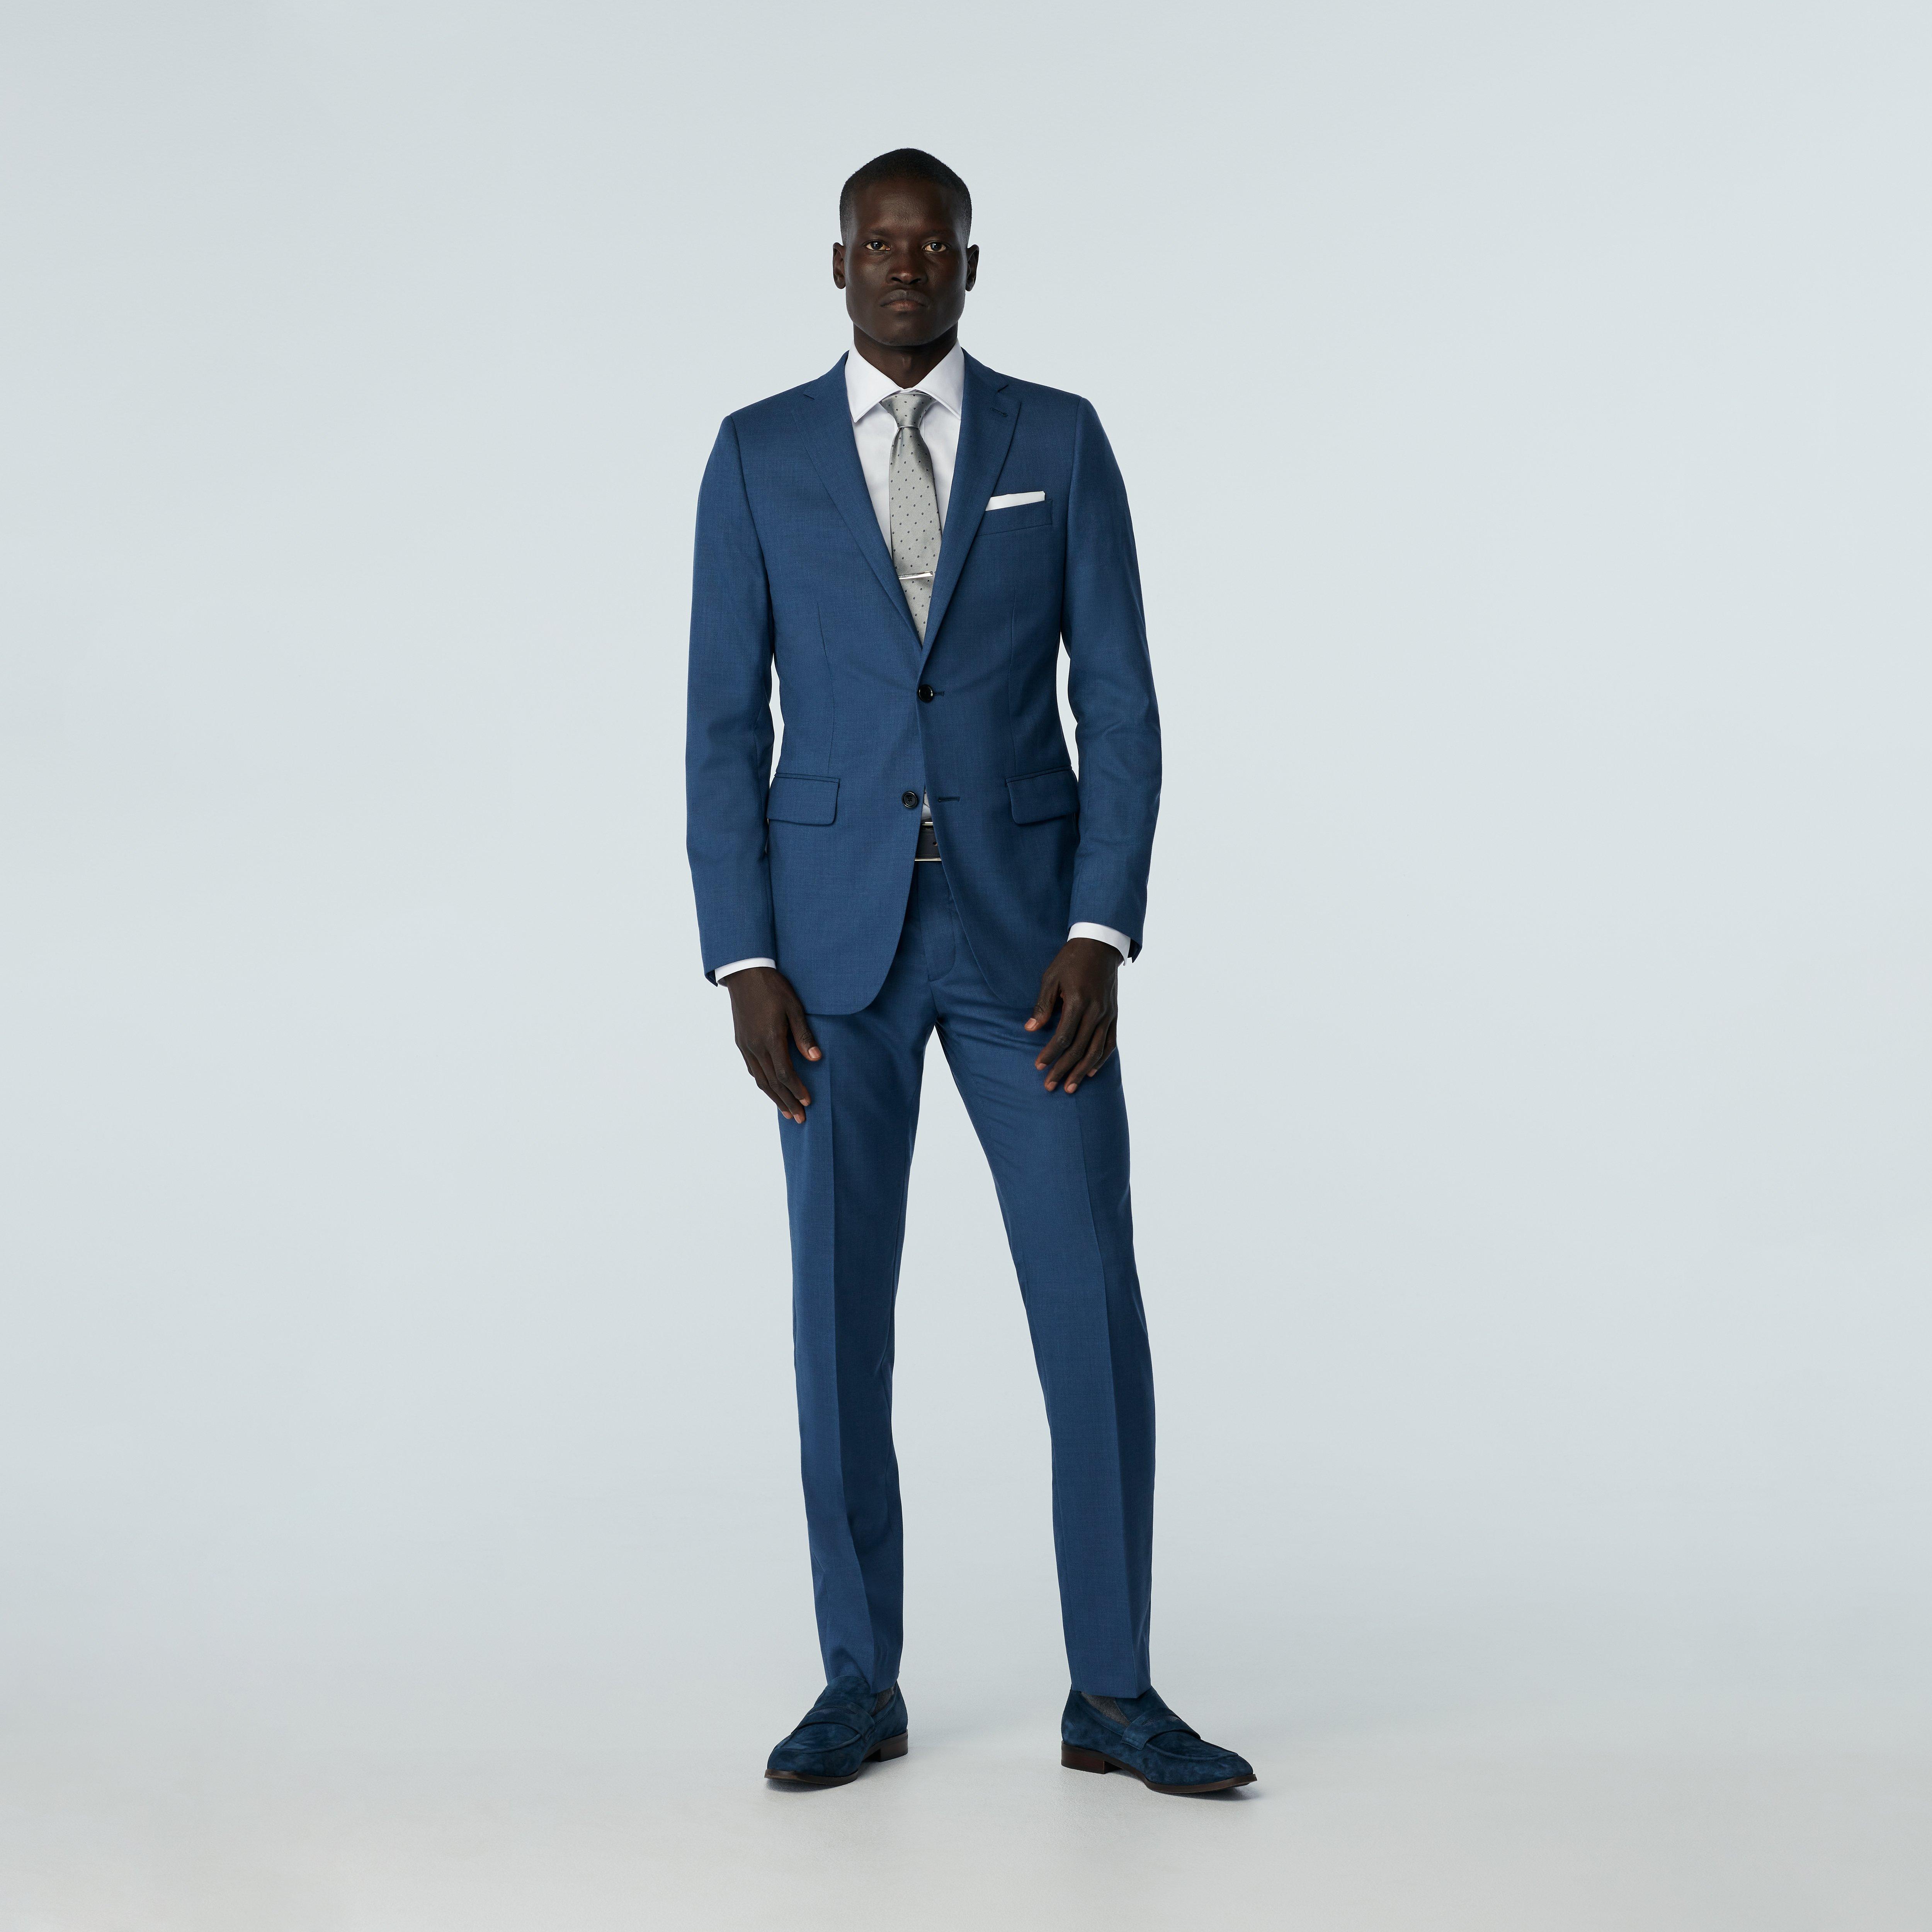 Men's Suits, Custom Made To Measure Suits